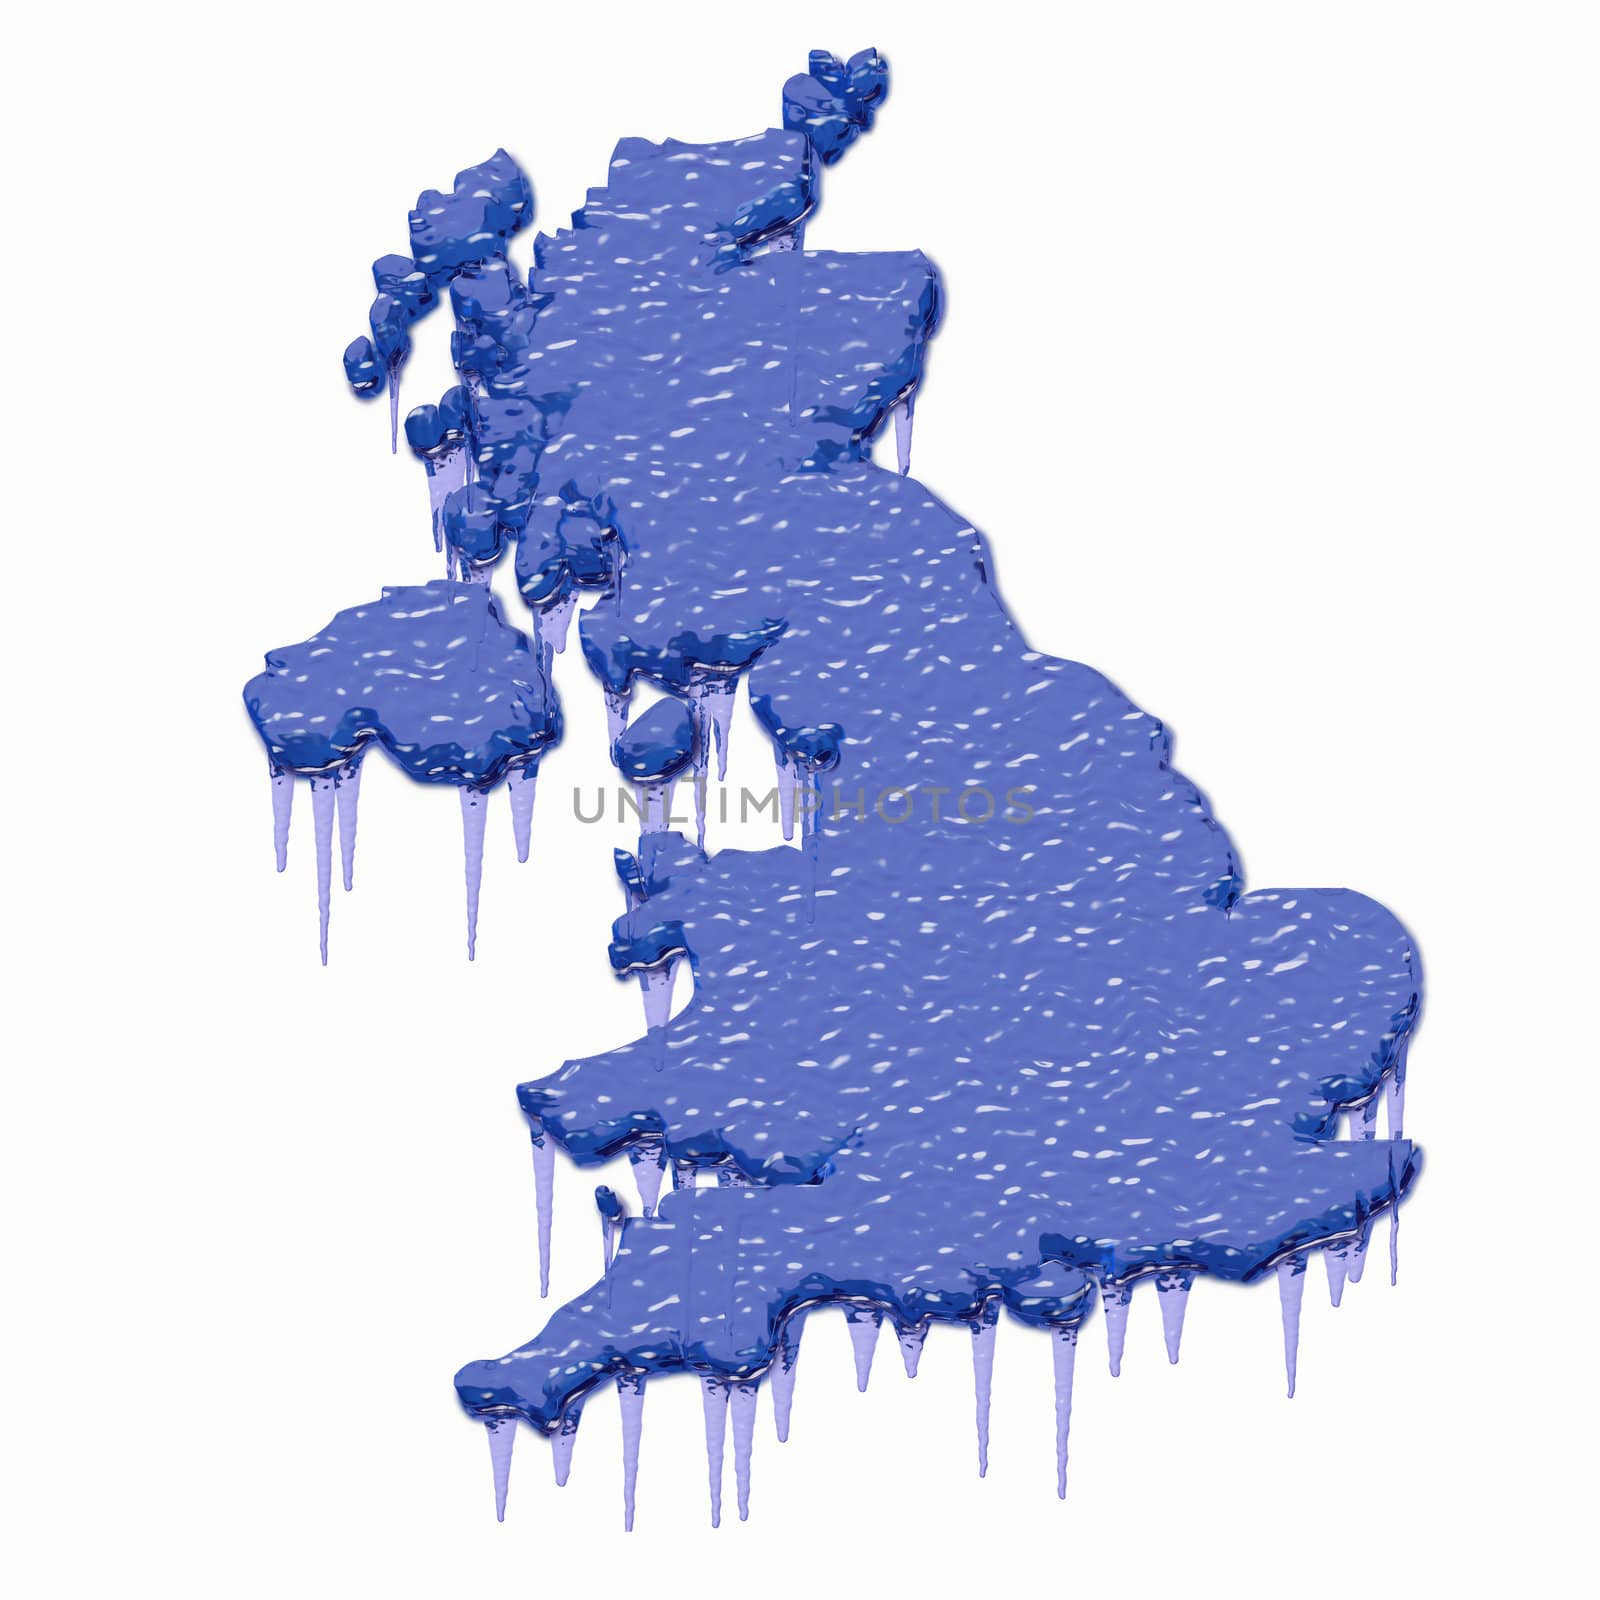 Britain 3d map in steel blue with gray shadow below